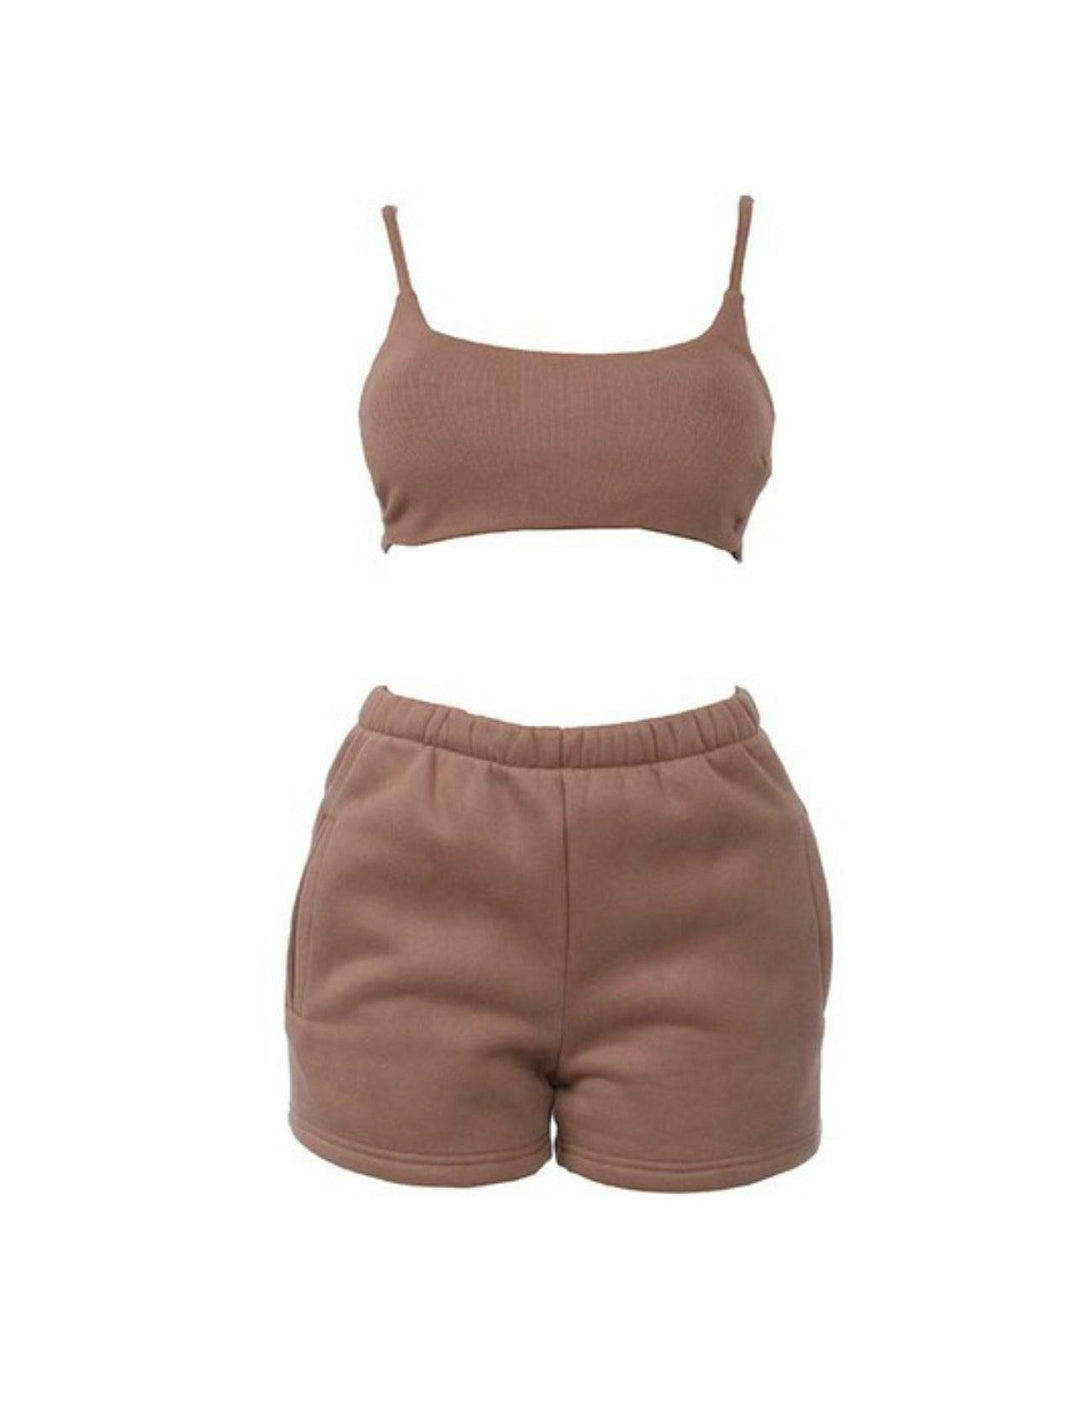 Essential Lounge Brown 2 Piece Set - Style Baby OMG Fashion Boutique - Stylebabyomg - Buy - Aesthetic Baddie Outfits - Babyboo - OOTD - Shie 